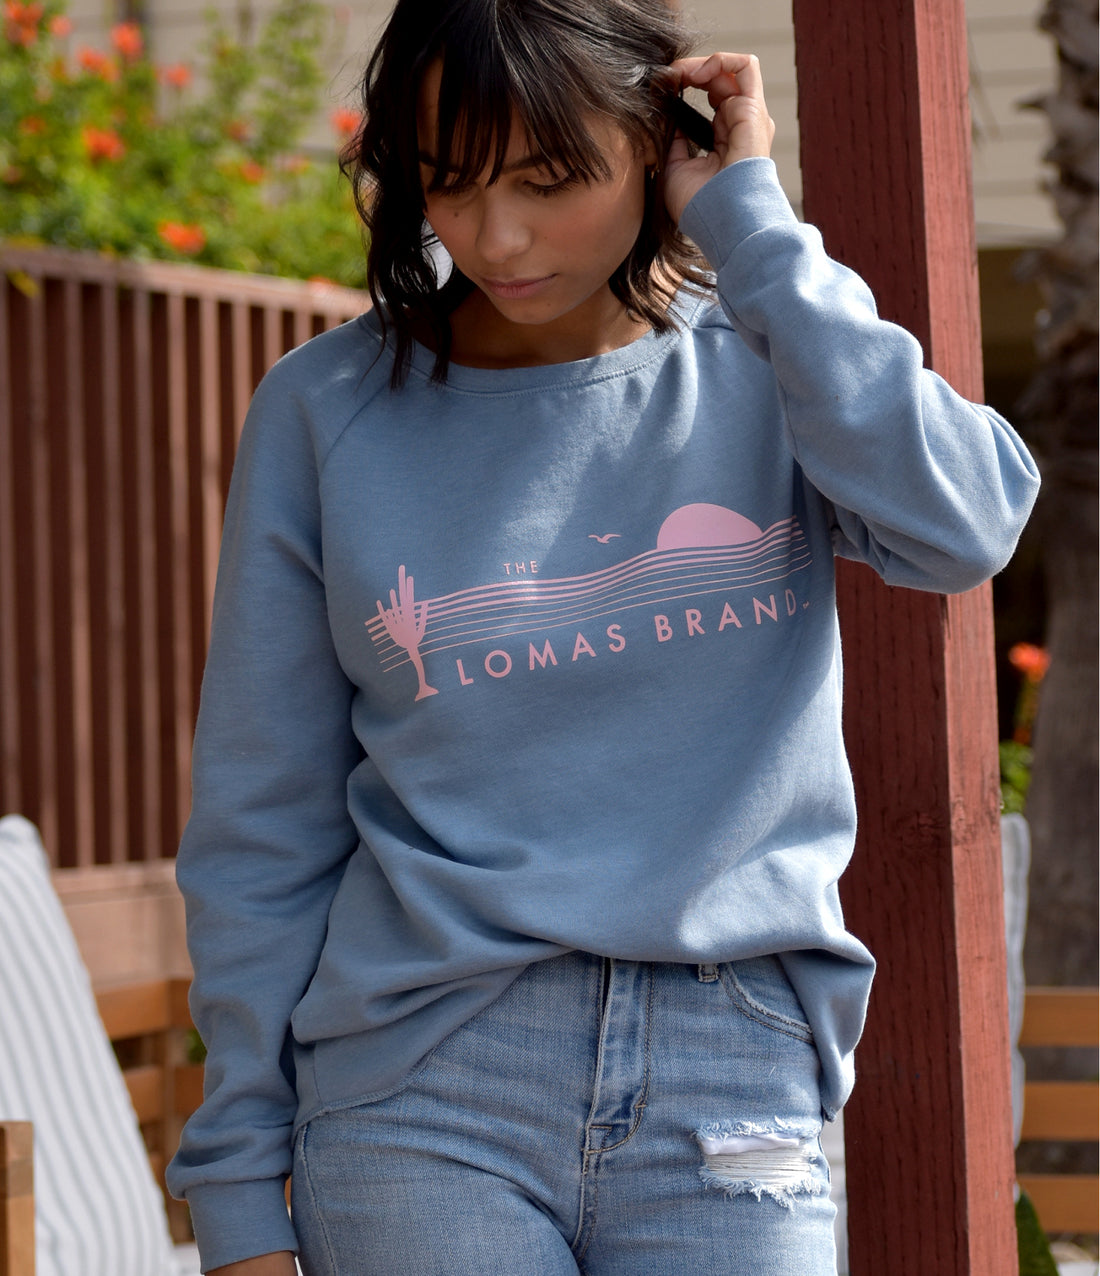 This seasons new take on the scoop neck pullover featuring our desert coast sunset logo in faint pink for a 90's retro type of style. Effortlessly pair with any jeans or leggings while snuggling in to this pullover's super soft, push fleece lining.     